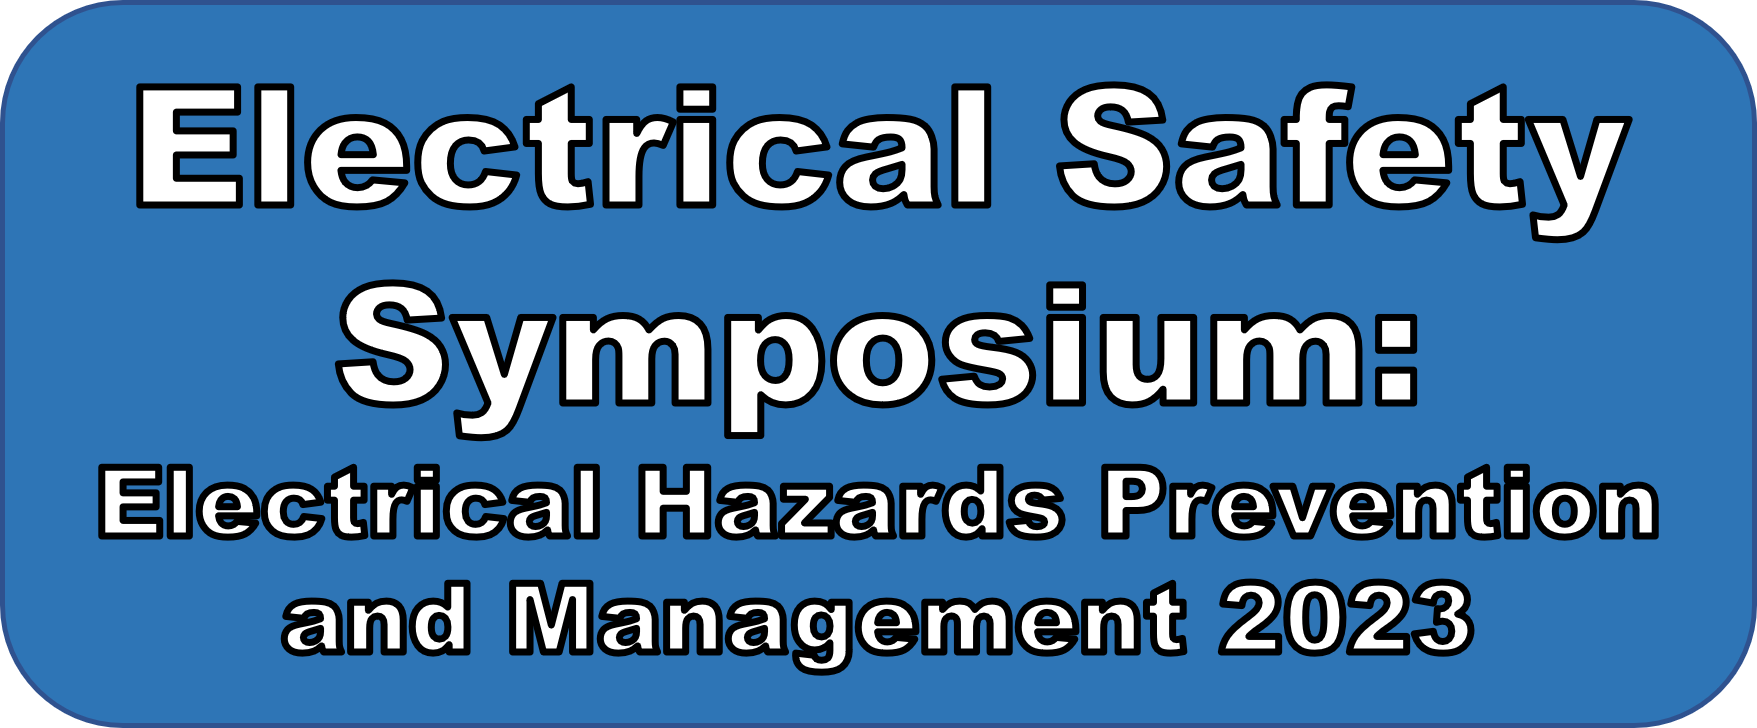 Electrical Safety Symposium: Electrical Hazards Prevention and Management 2023